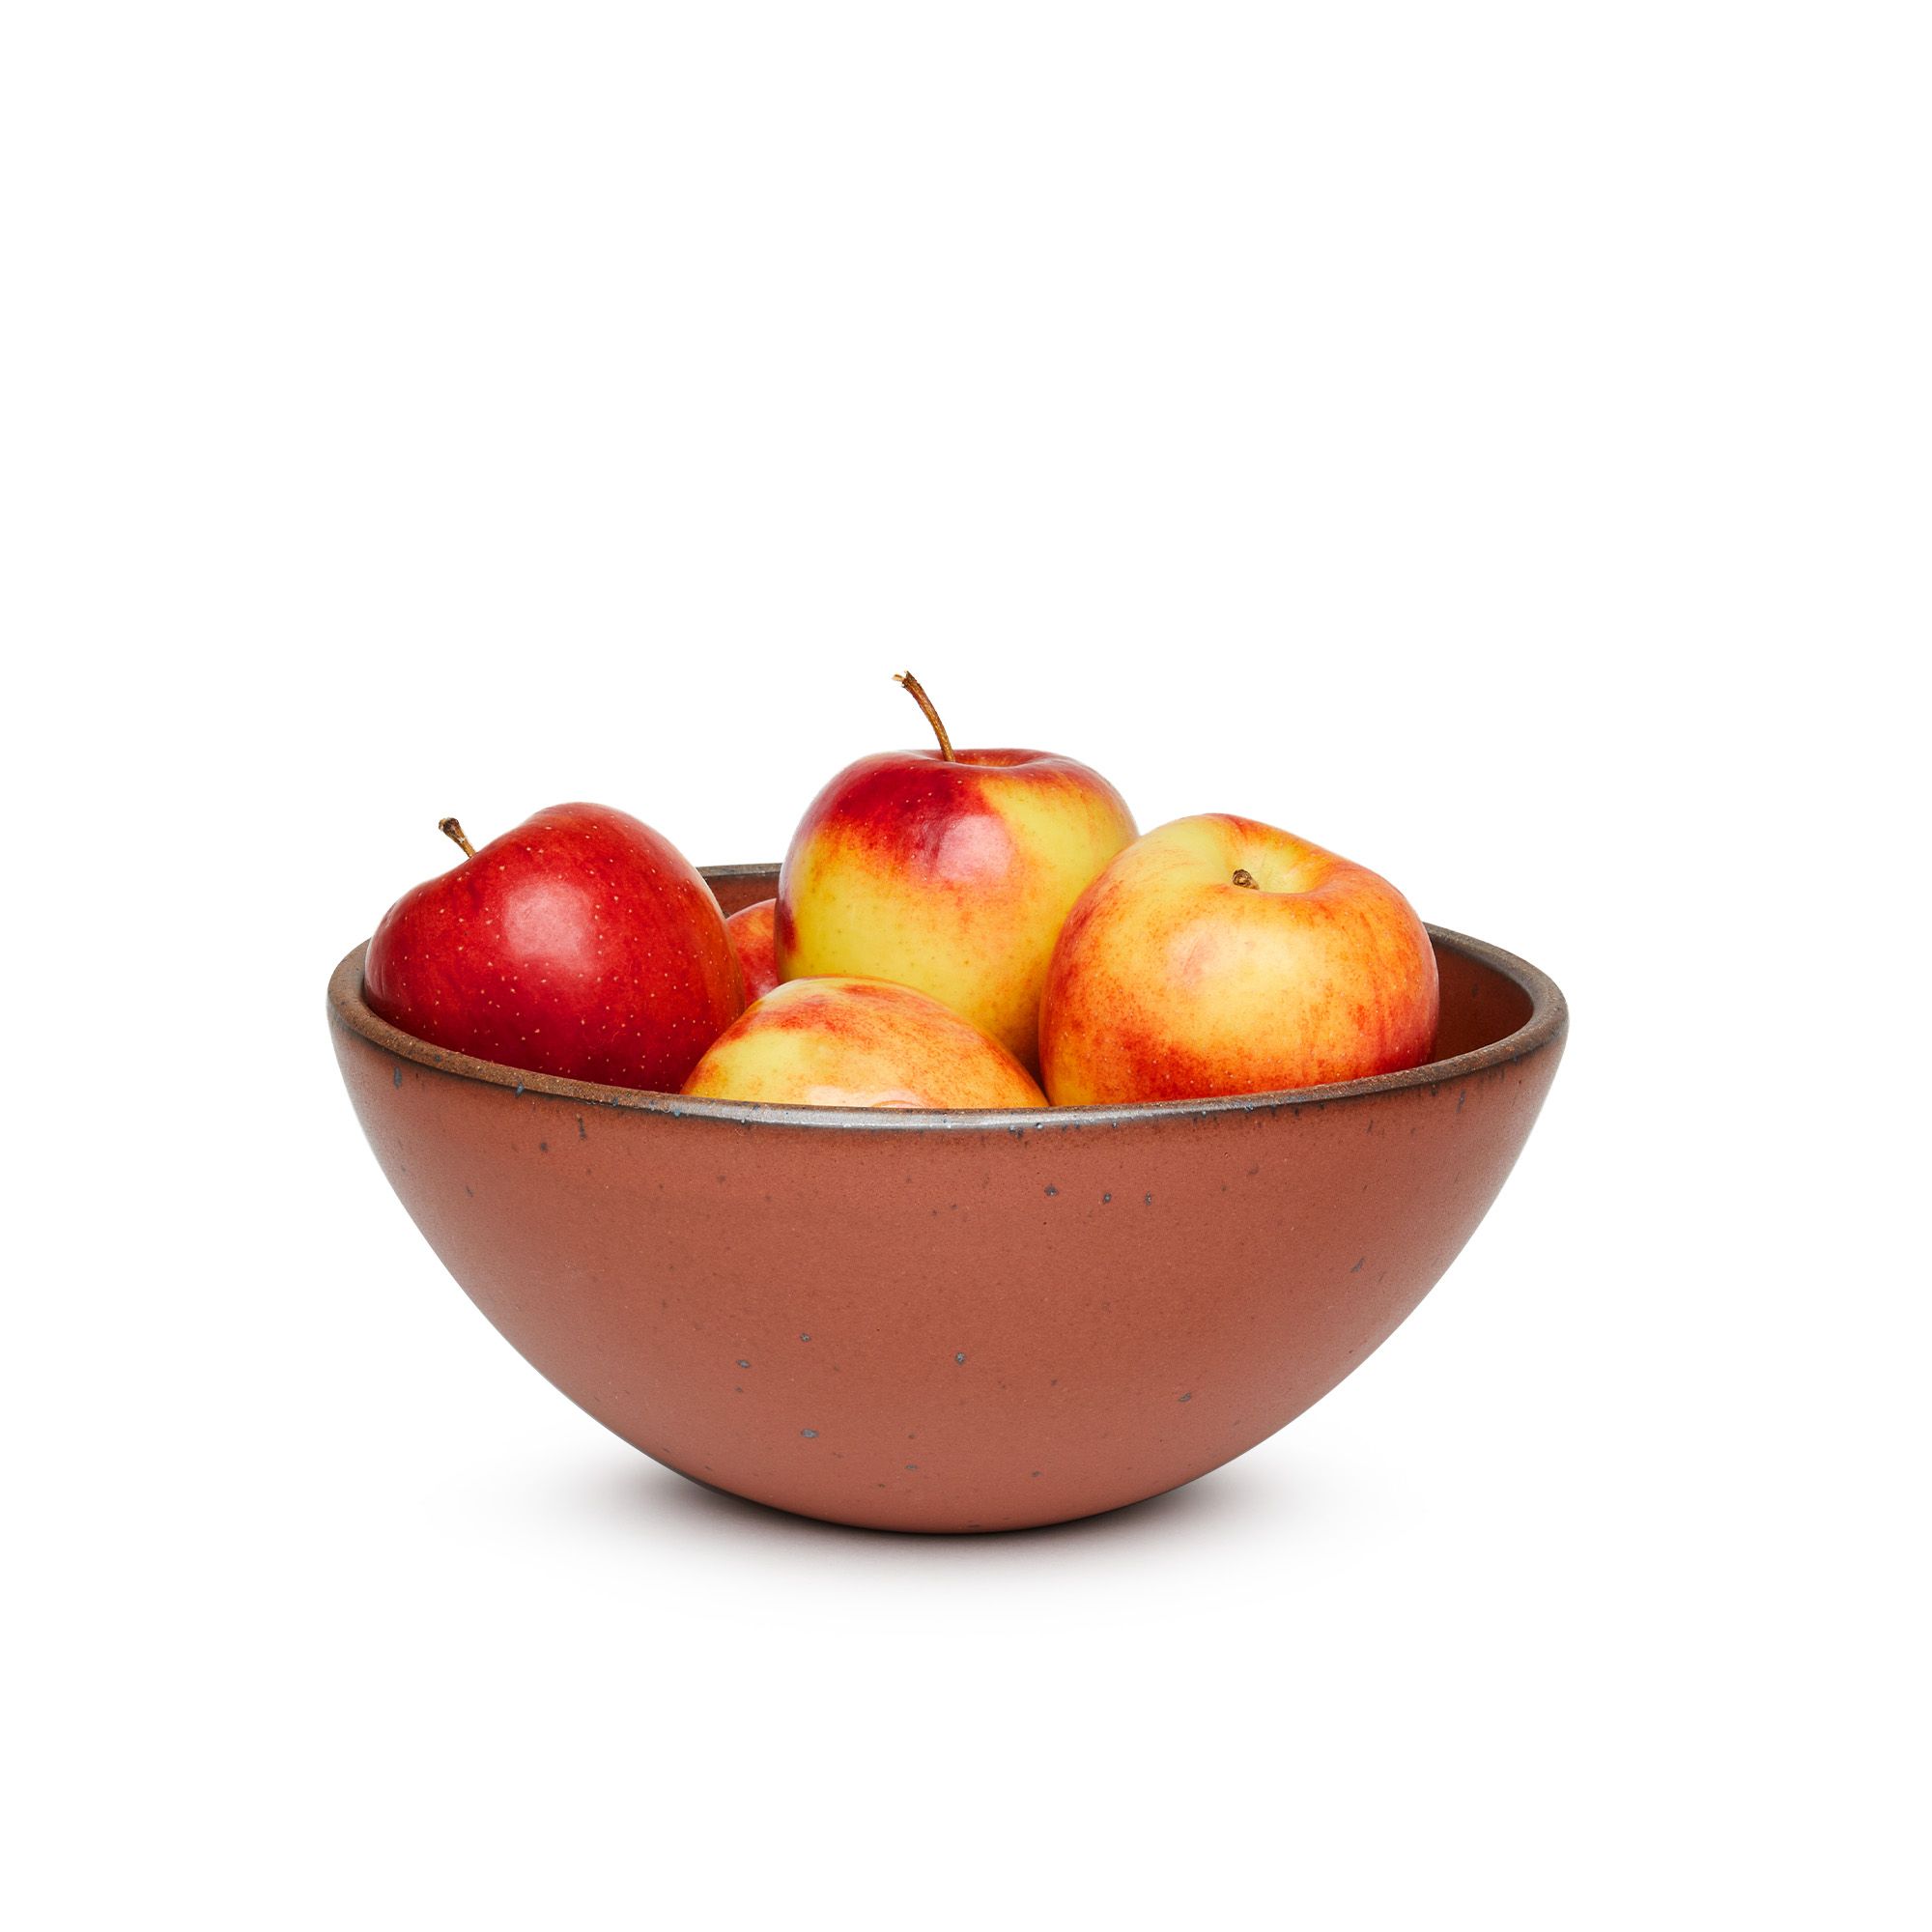 A large rounded ceramic bowl in a cool burnt terracotta color featuring iron speckles and an unglazed rim, filled with apples